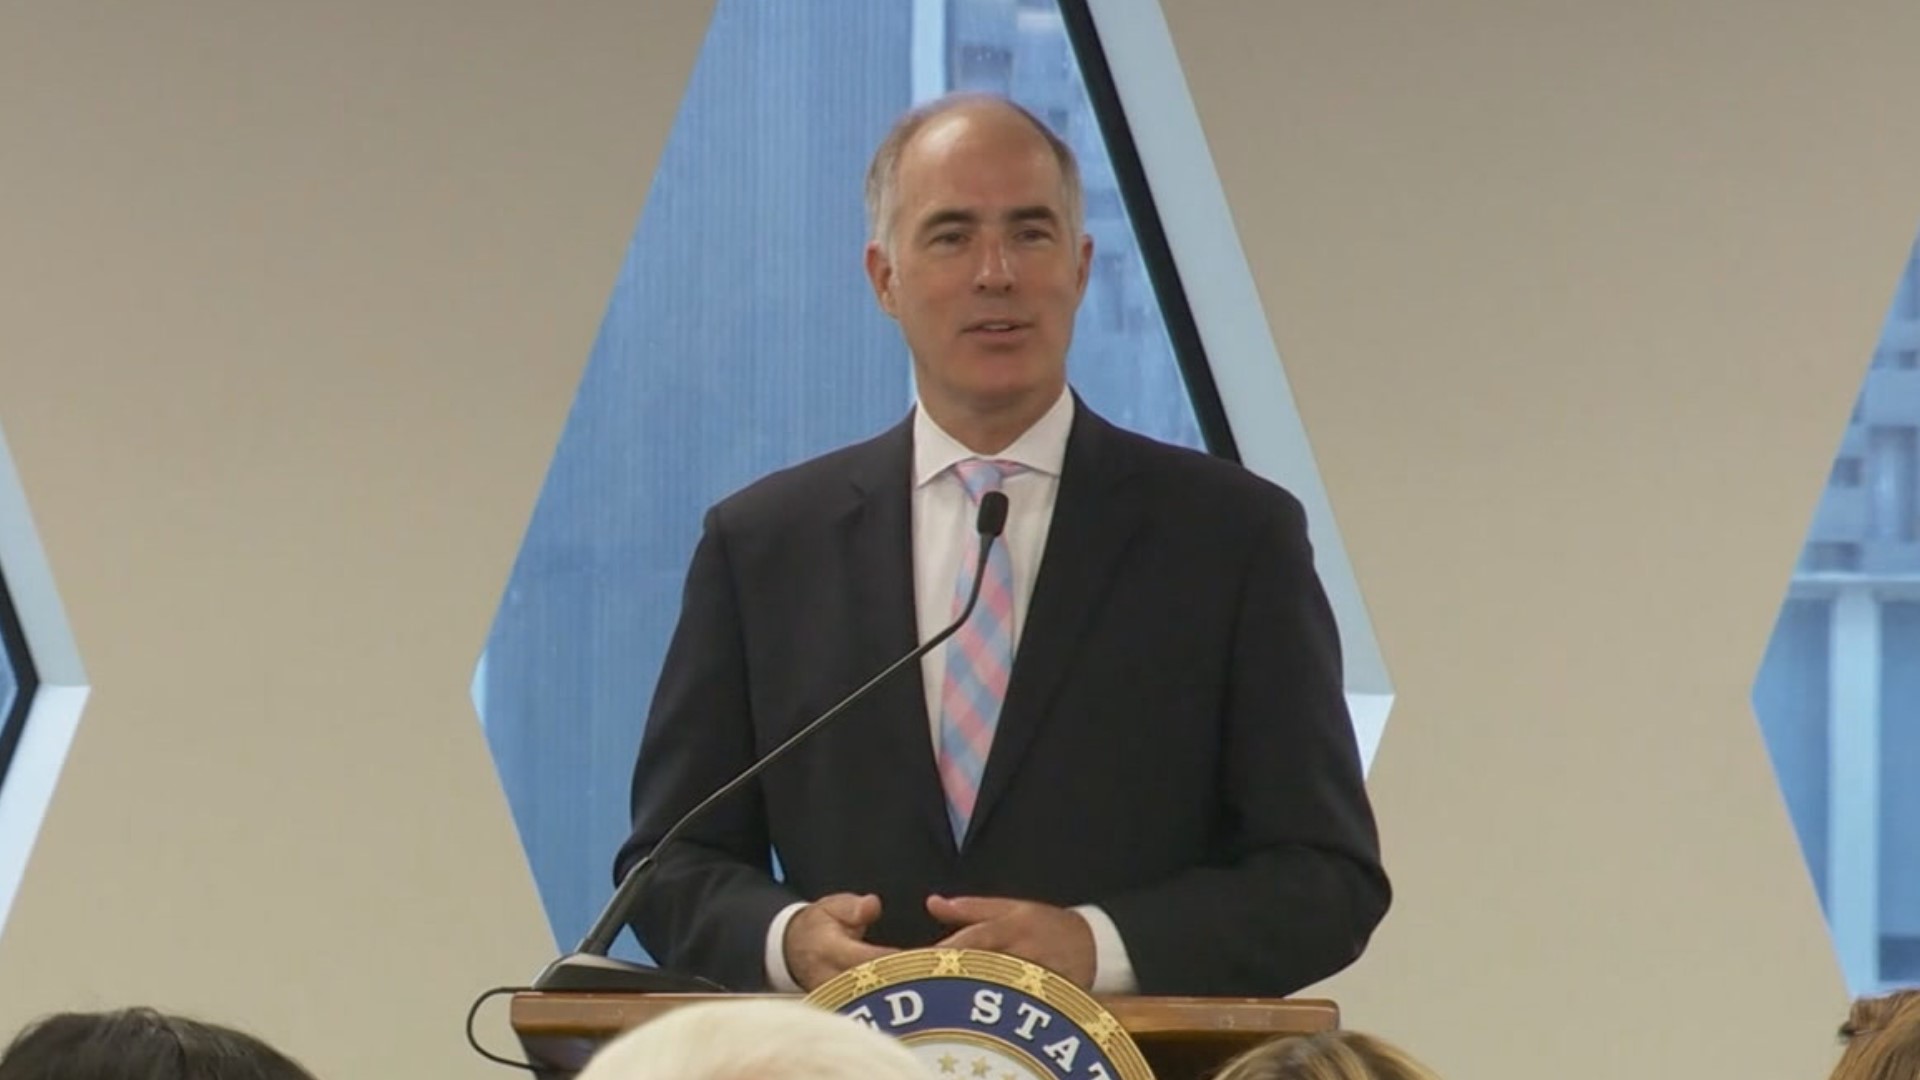 Senator Bob Casey from Pennsylvania underwent surgery Tuesday for prostate cancer.